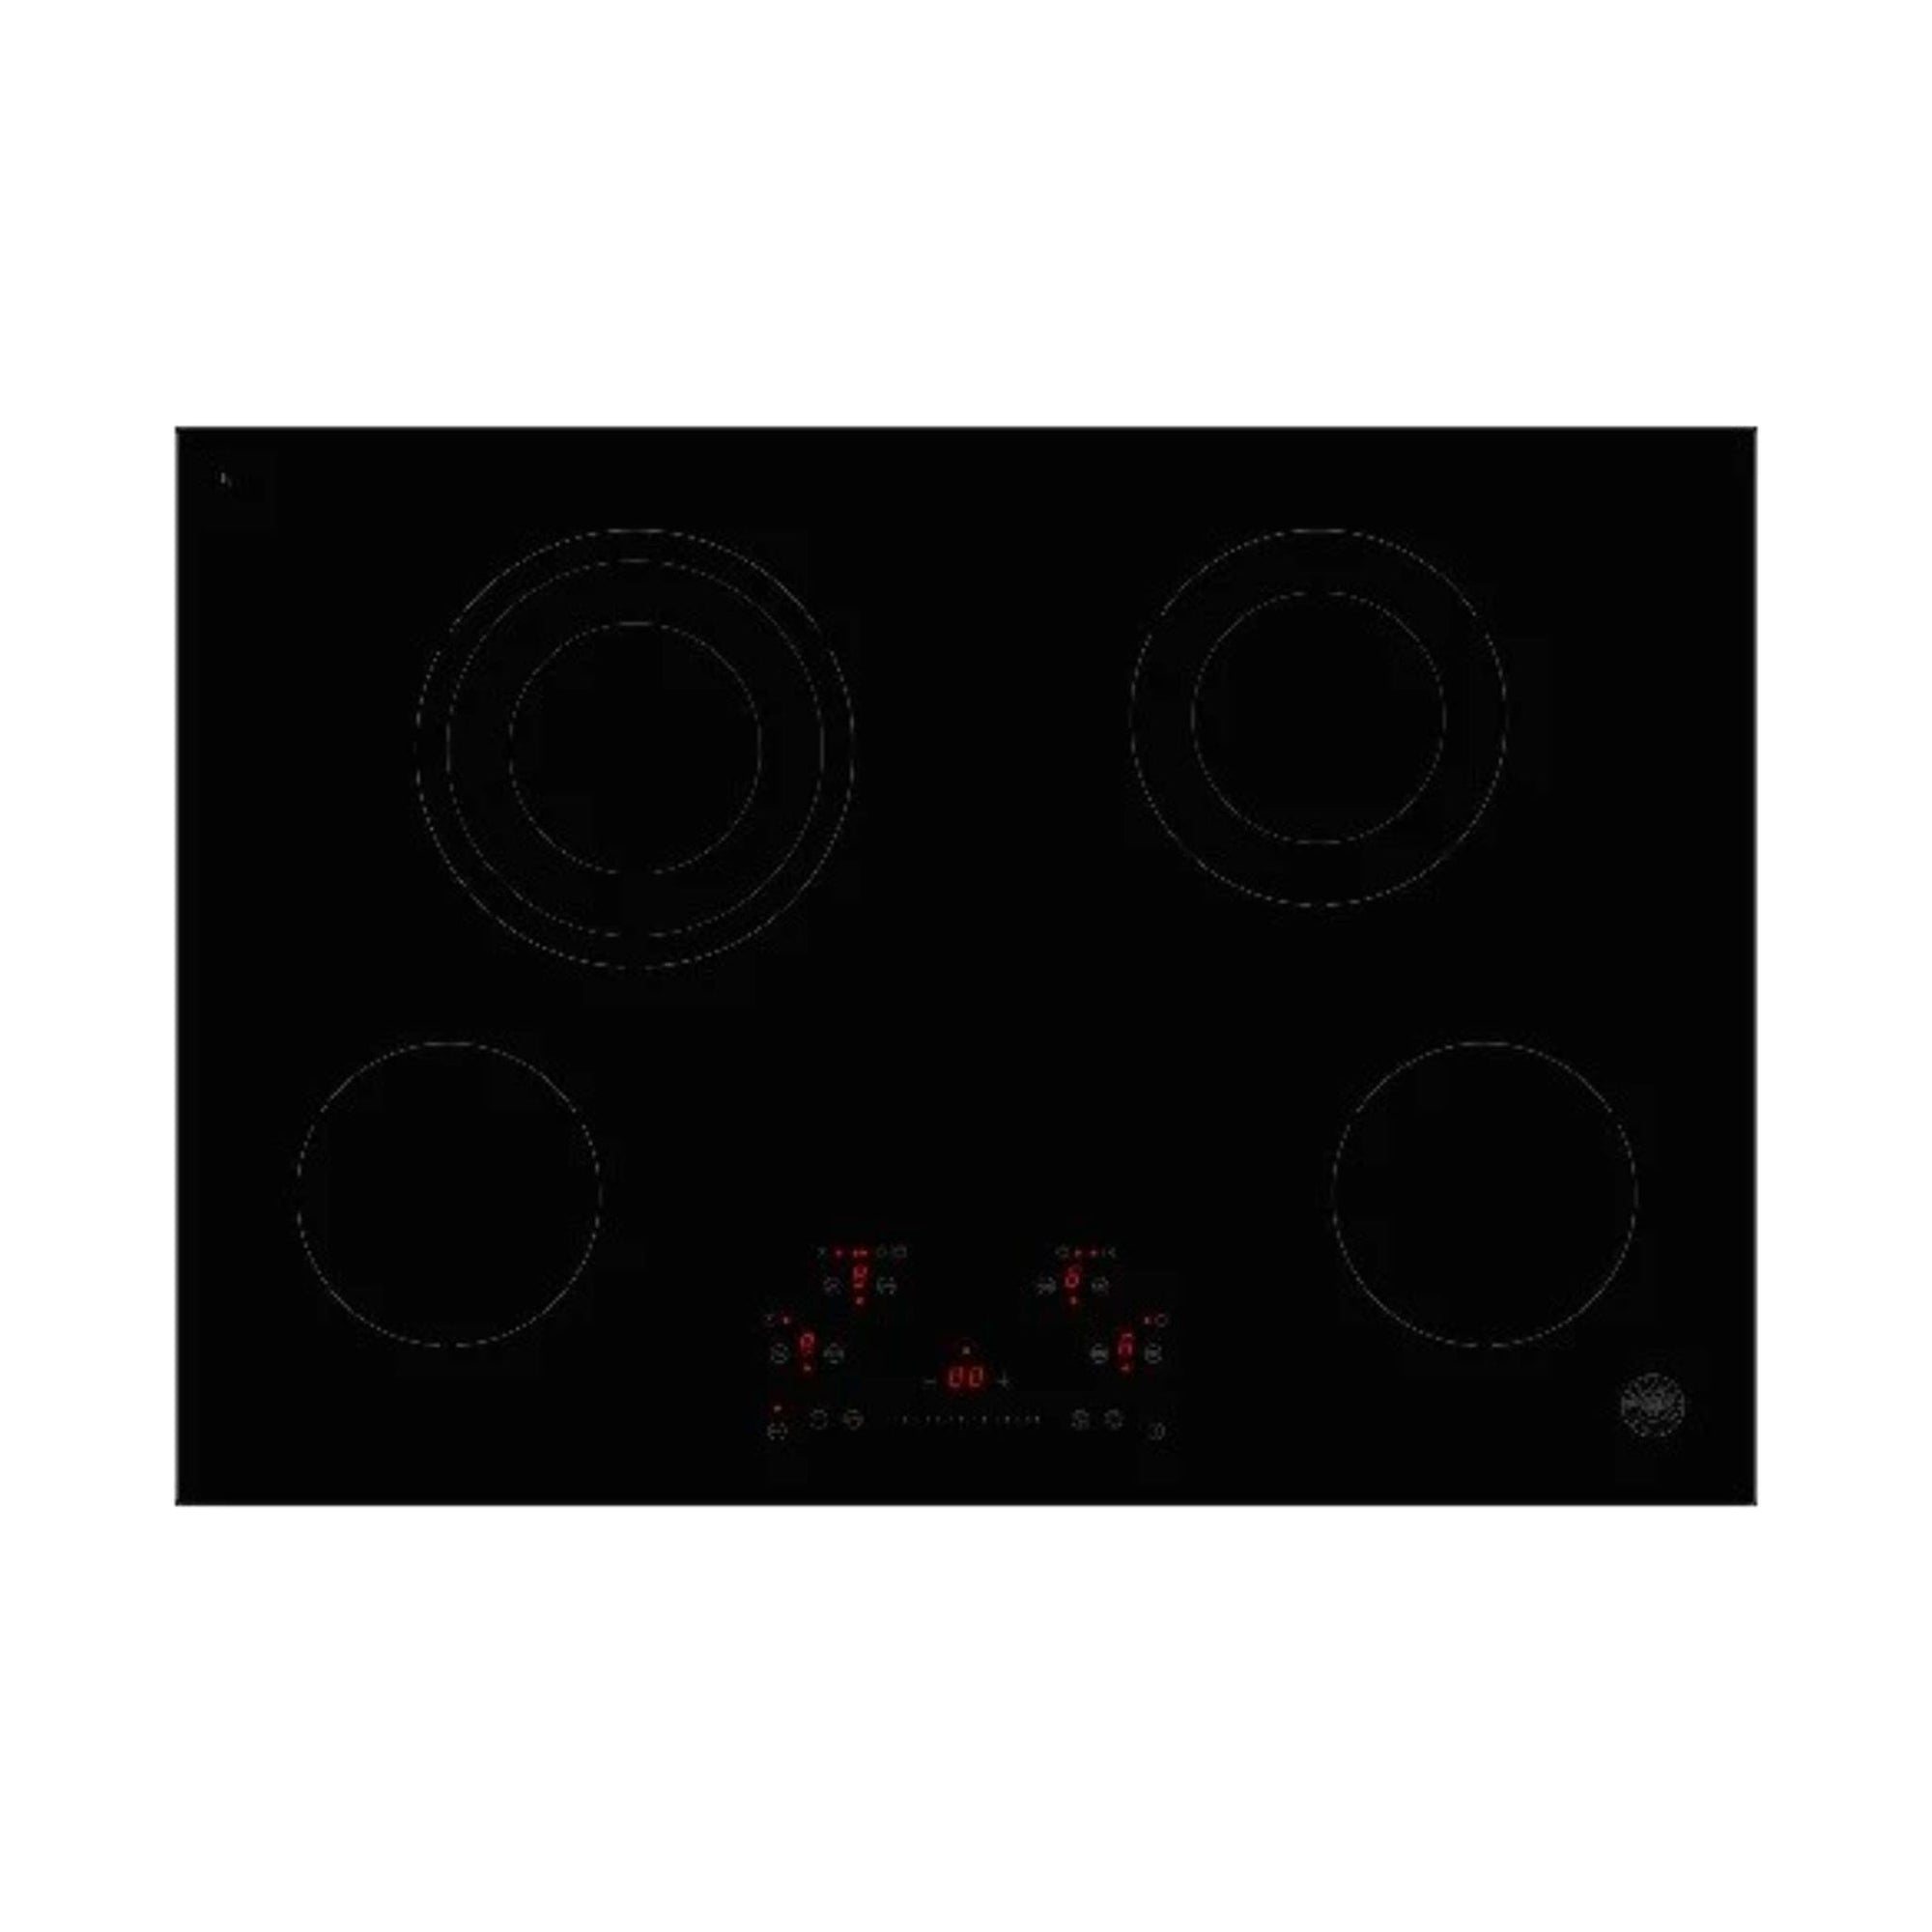 30" Ceran Touch Control Cooktop 4 Heating Zones - Culinary Hardware